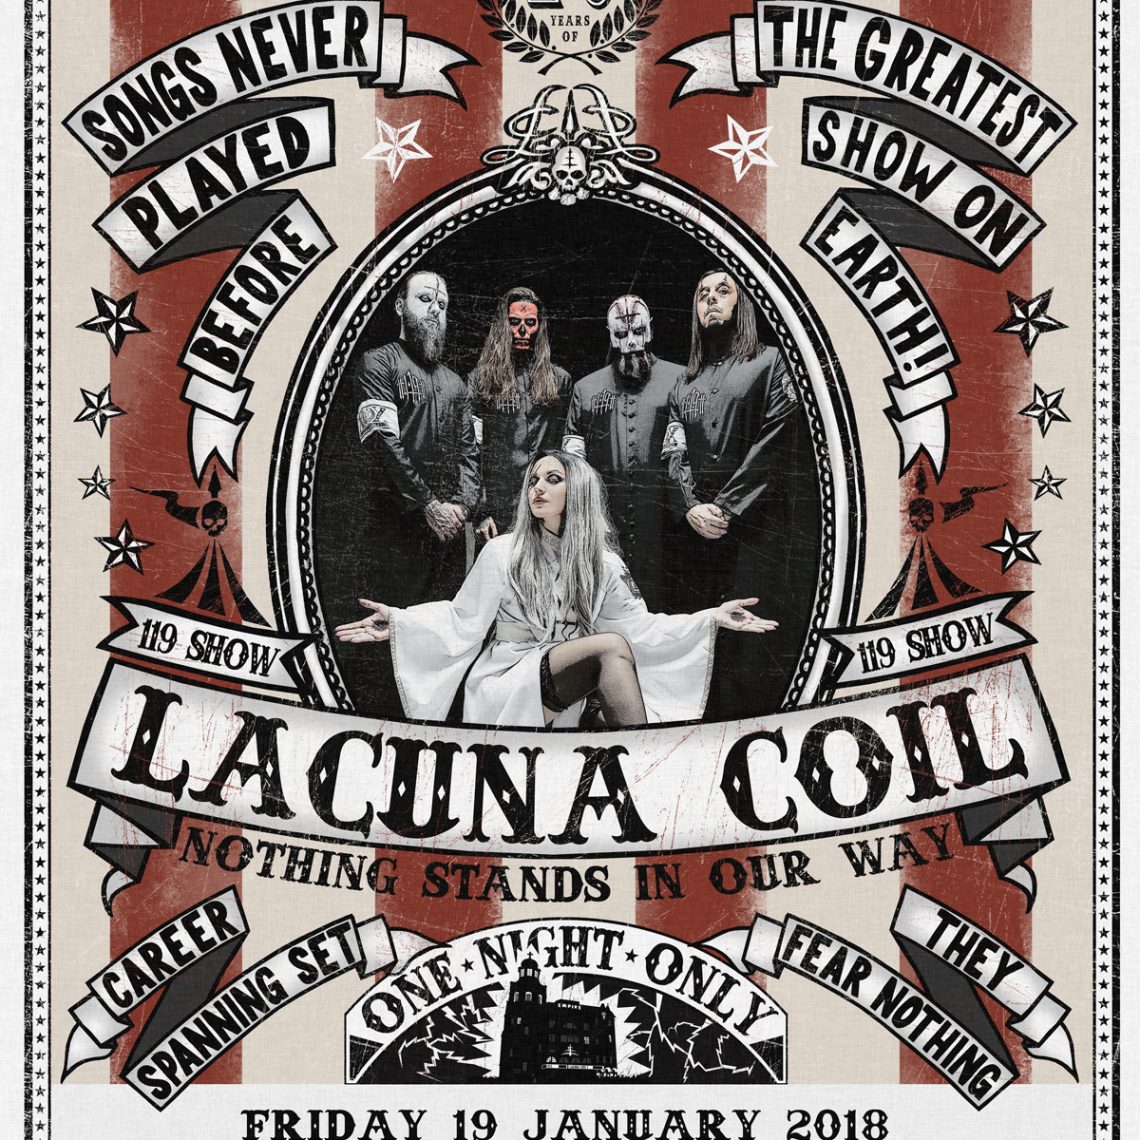 LACUNA COIL announce 20th anniversary show “Nothing Stands In Our Way”